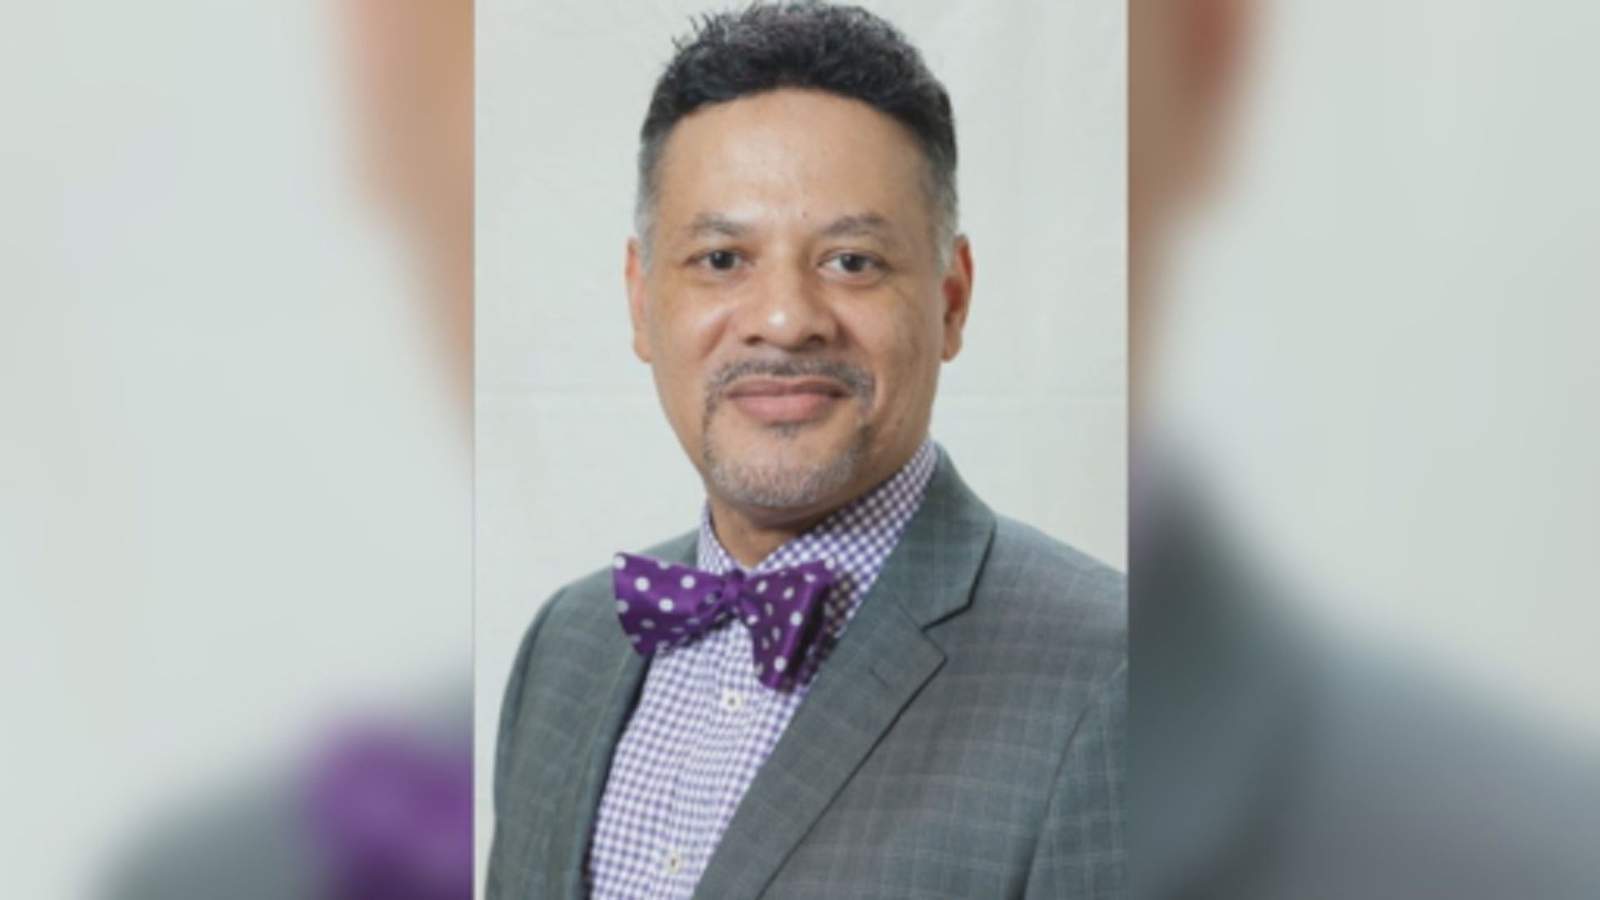 Former TSU law school assistant dean surrenders, posts $10,000 bond in theft charge